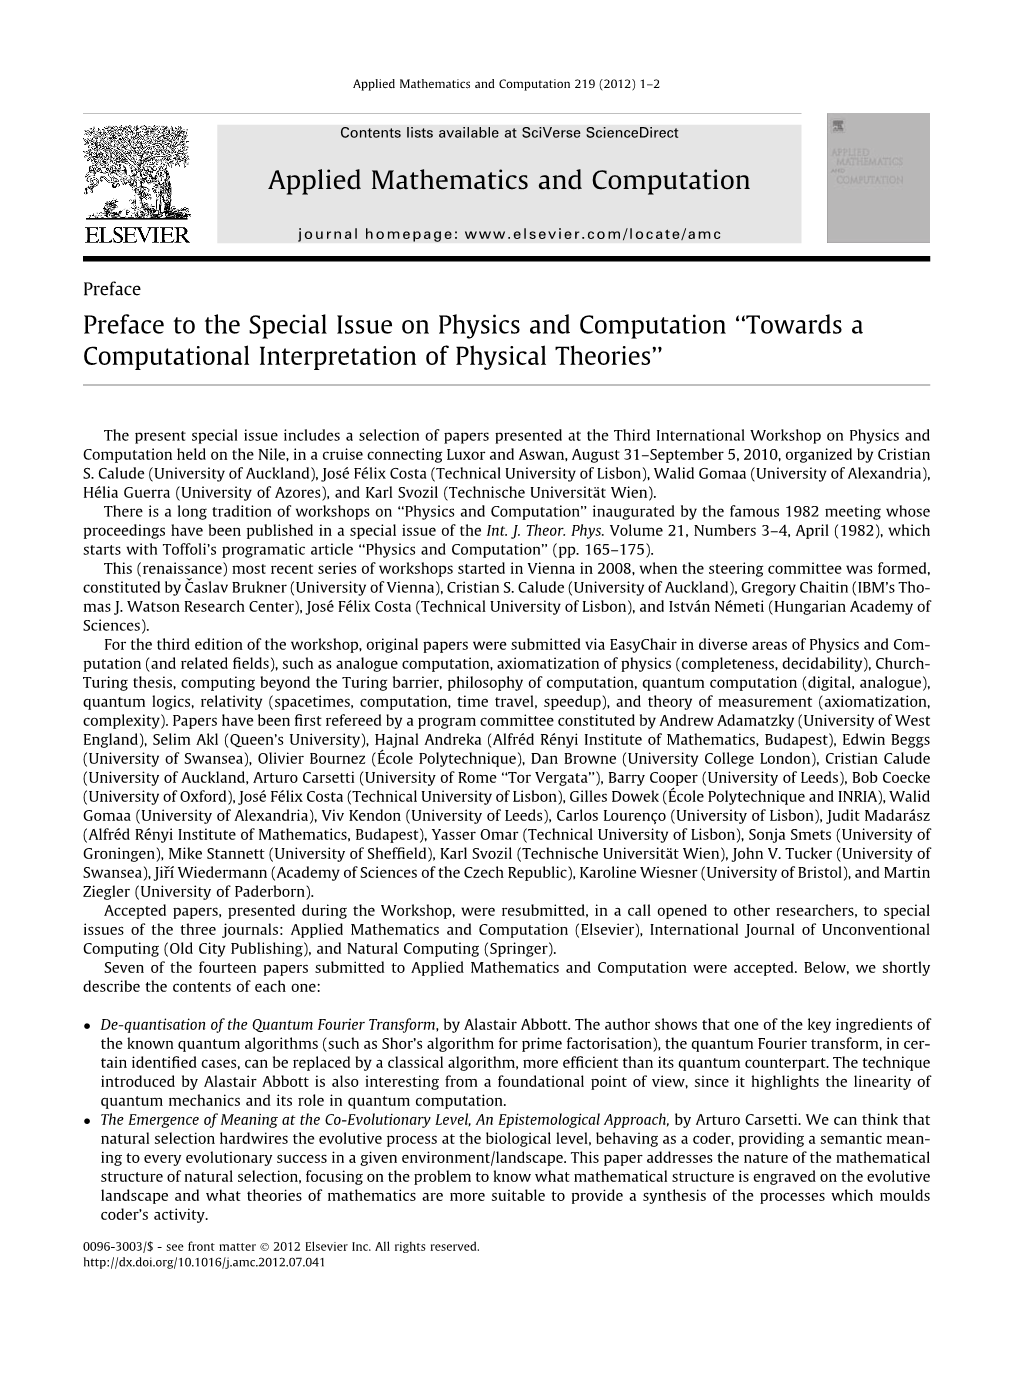 Preface to the Special Issue on Physics and Computation ‘‘Towards a Computational Interpretation of Physical Theories’’